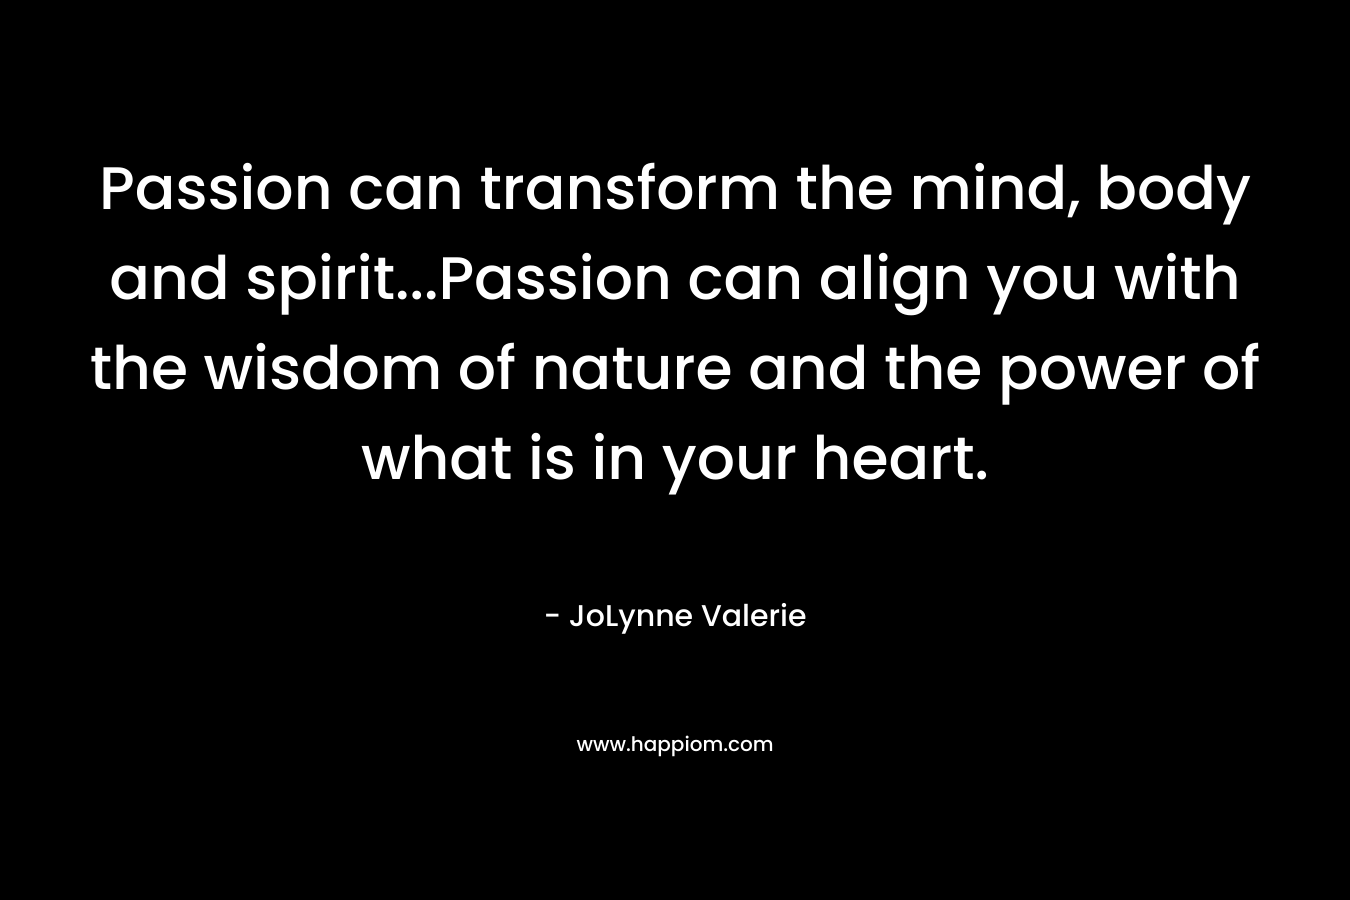 Passion can transform the mind, body and spirit…Passion can align you with the wisdom of nature and the power of what is in your heart. – JoLynne Valerie